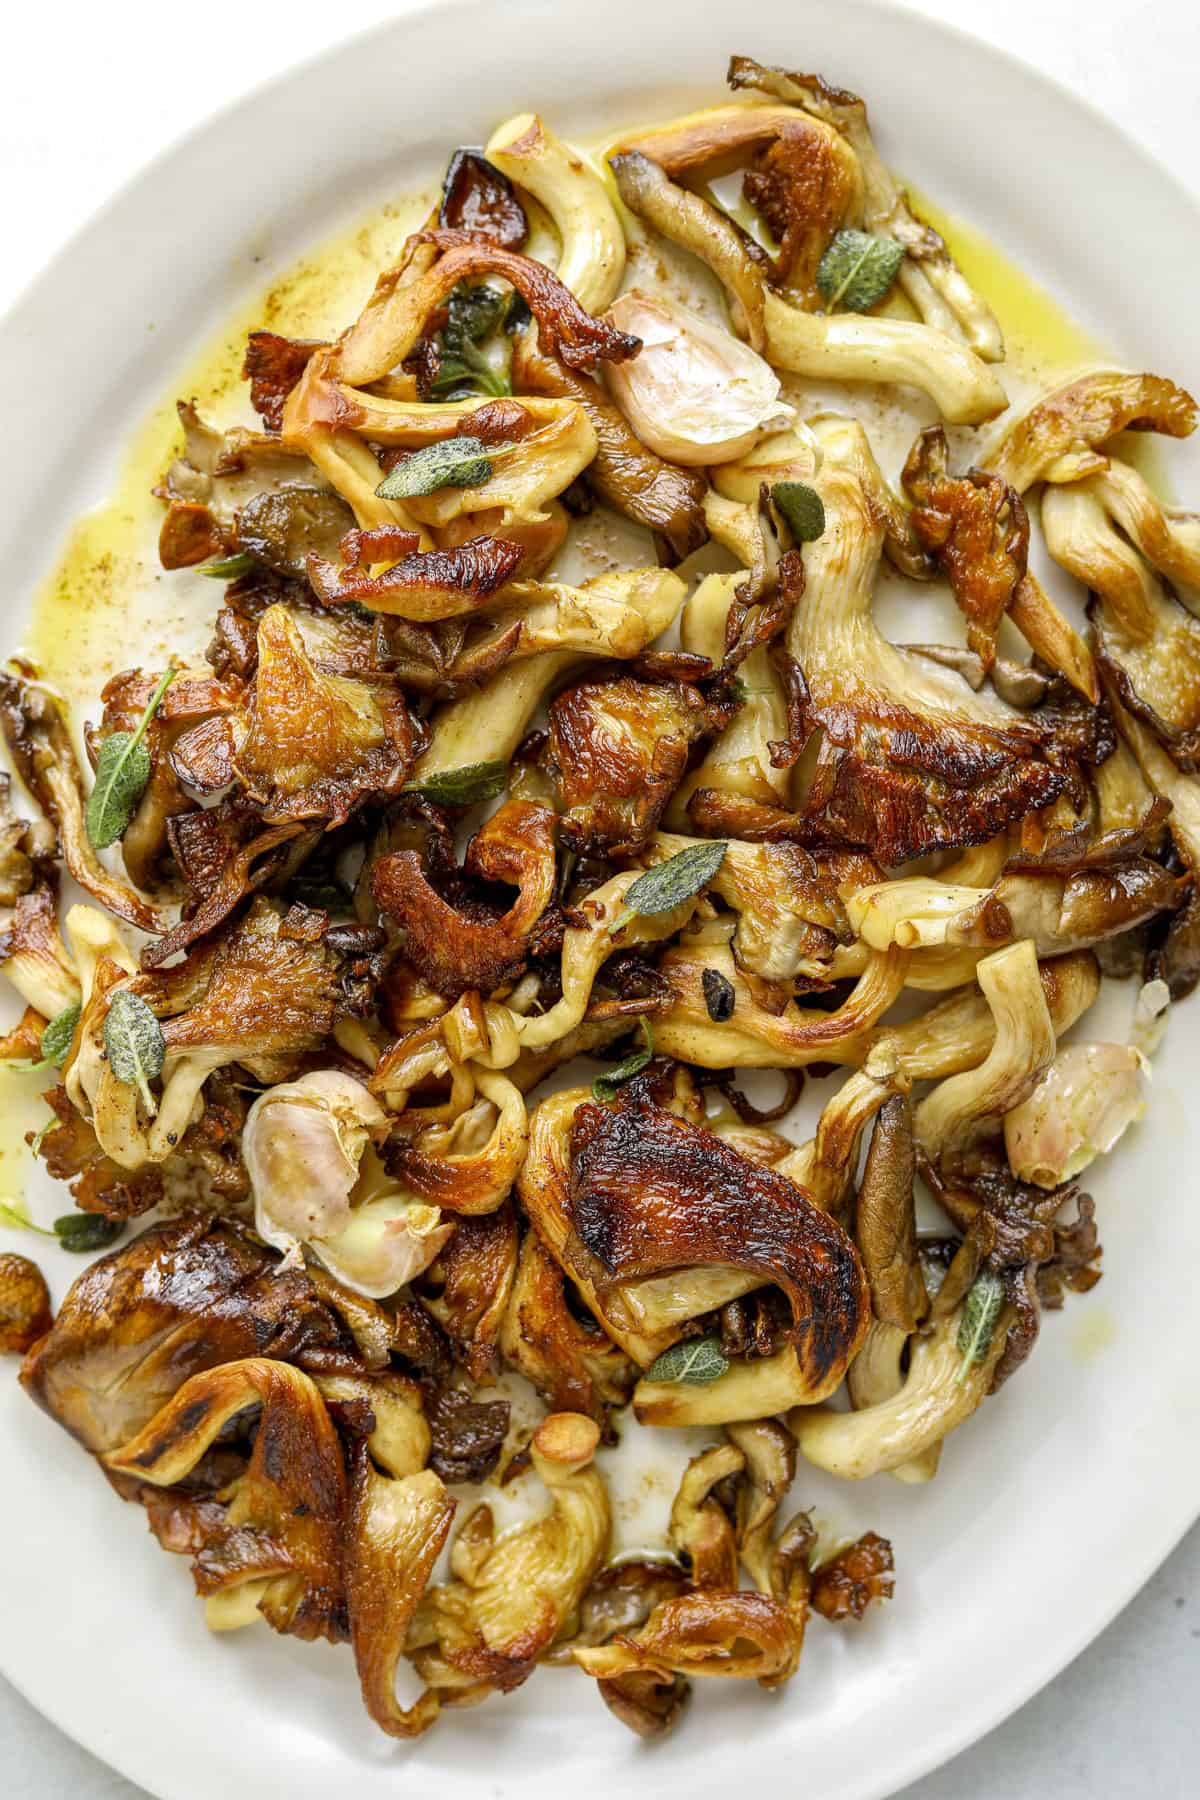 A white oval serving platter piled high with golden-brown roasted oyster mushrooms, crispy sage leaves, whole garlic cloves and pools of nutty brown butter.